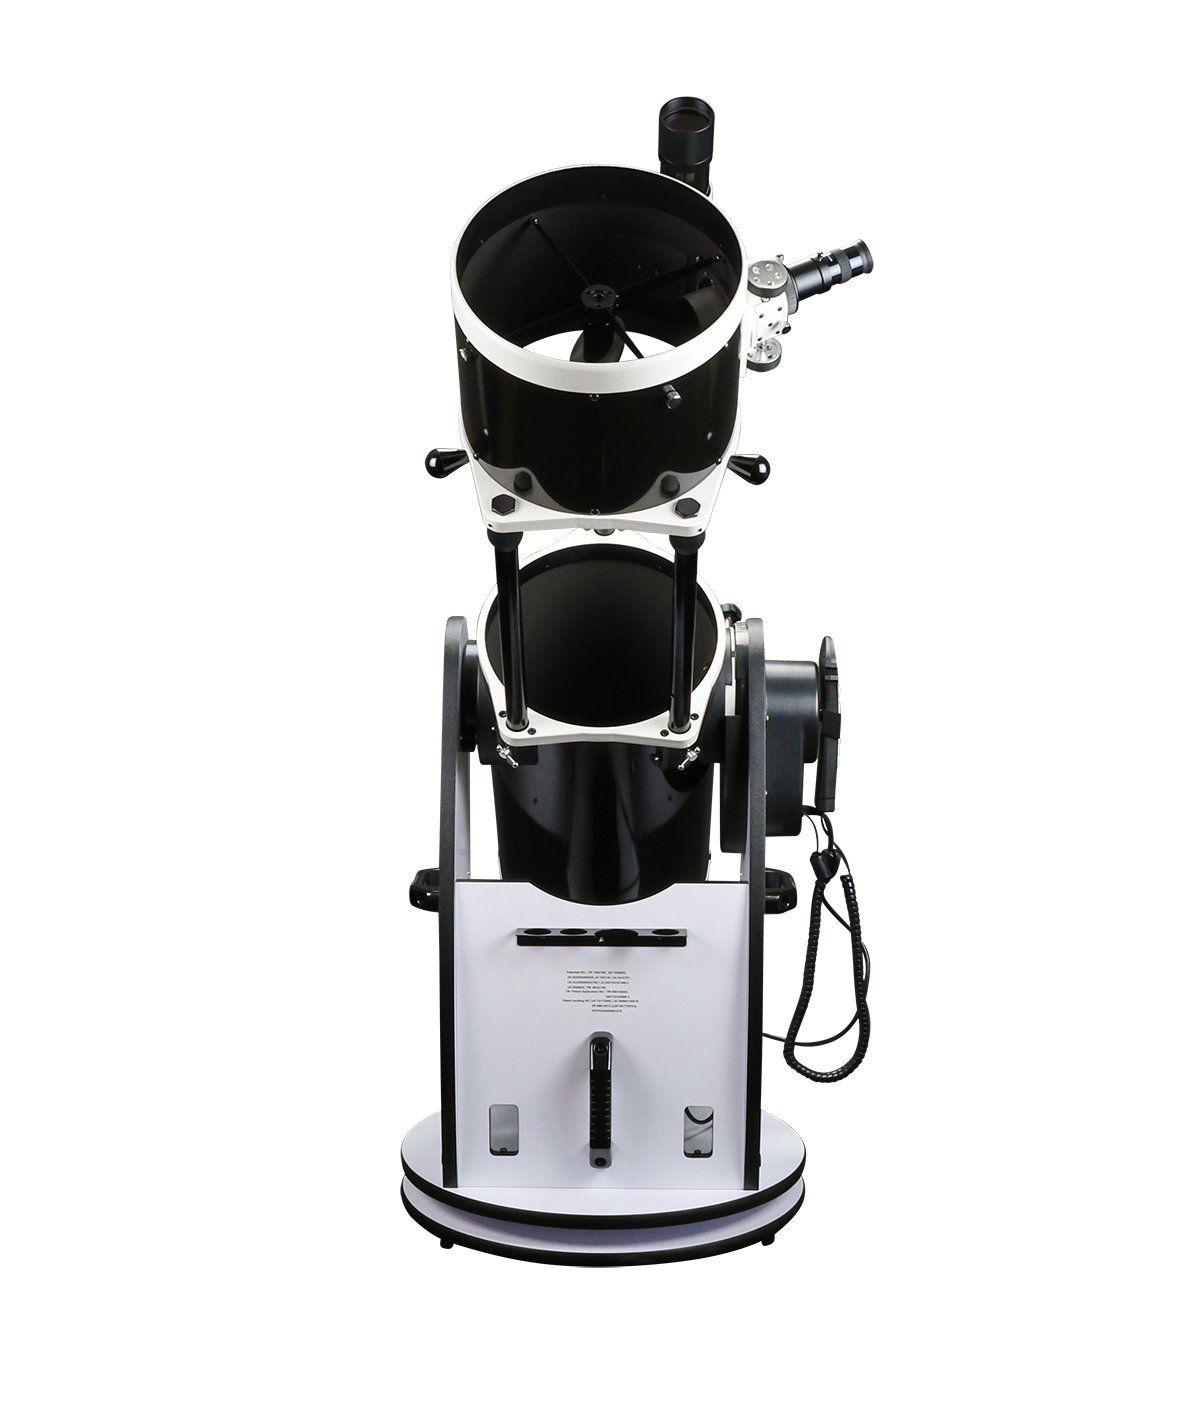 Sky Watcher Sky-Watcher Flextube 250 SynScan Dobsonian 10-inch Collapsible Computerized GoTo Large Aperture Telescope, White, (S11810)